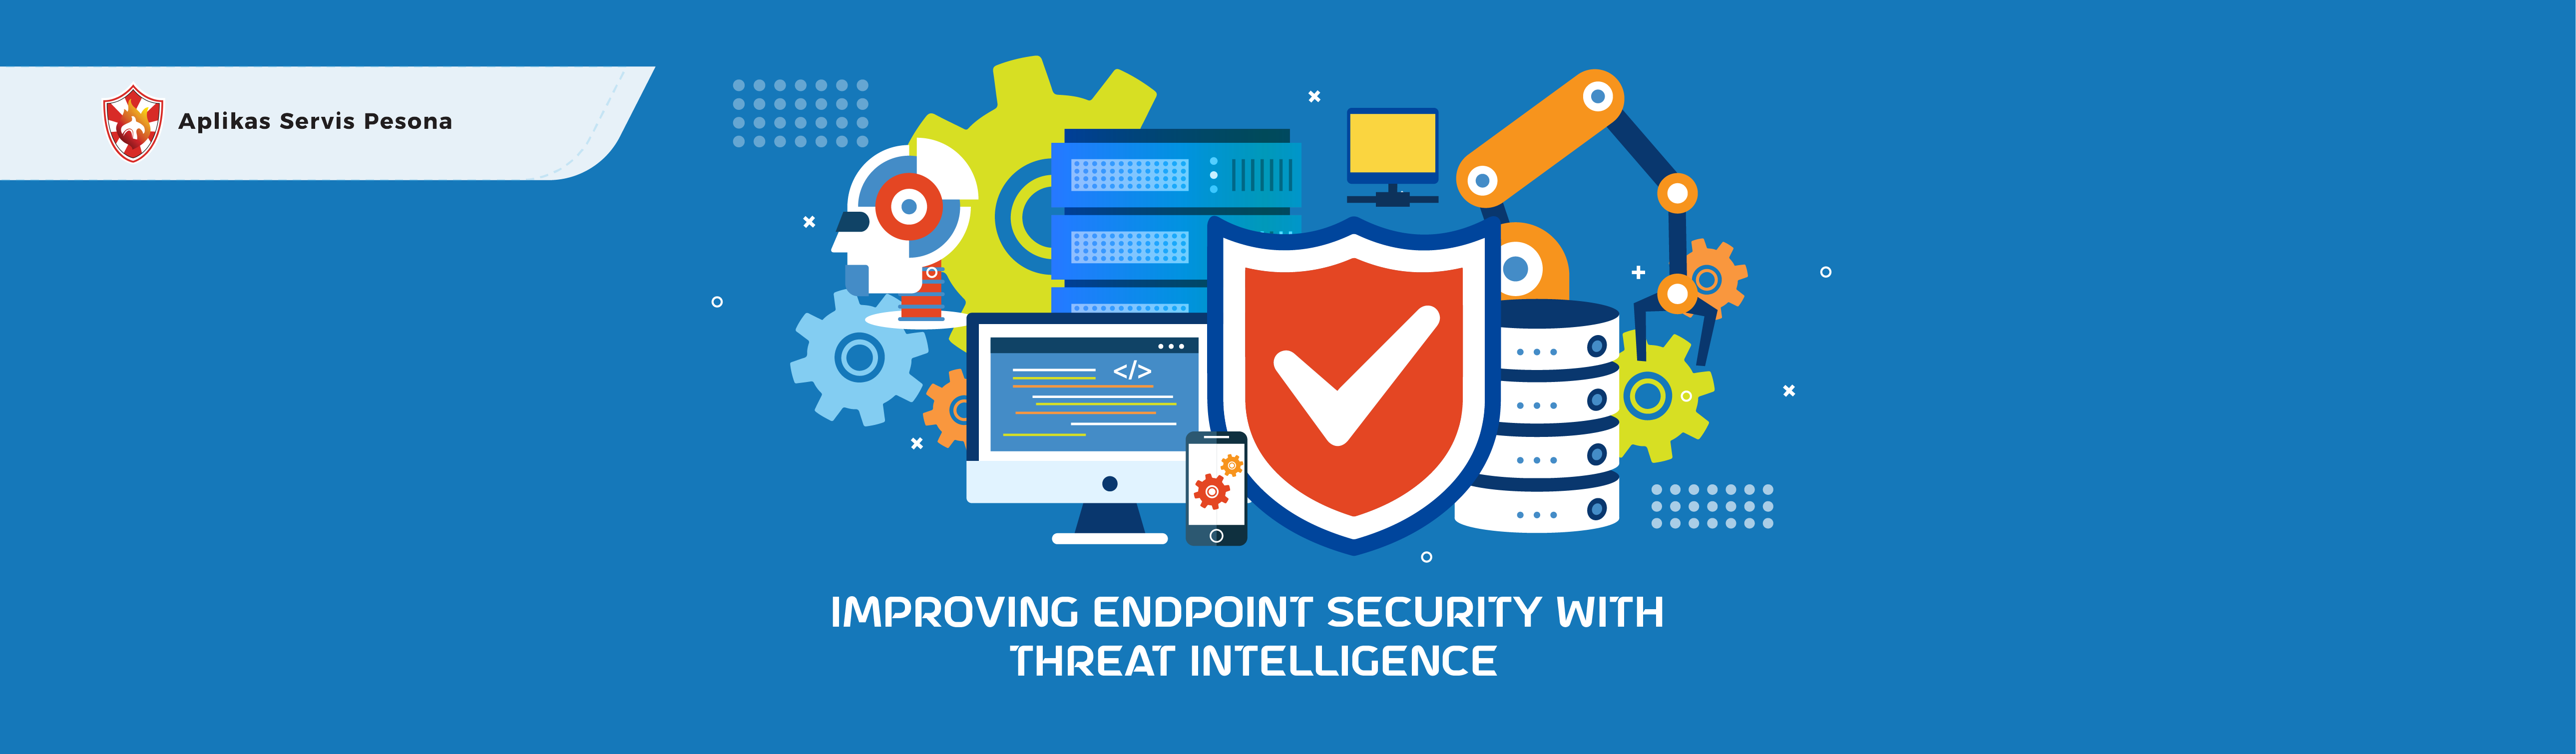 Improving Endpoint Security Capabilities with Threat Intelligence